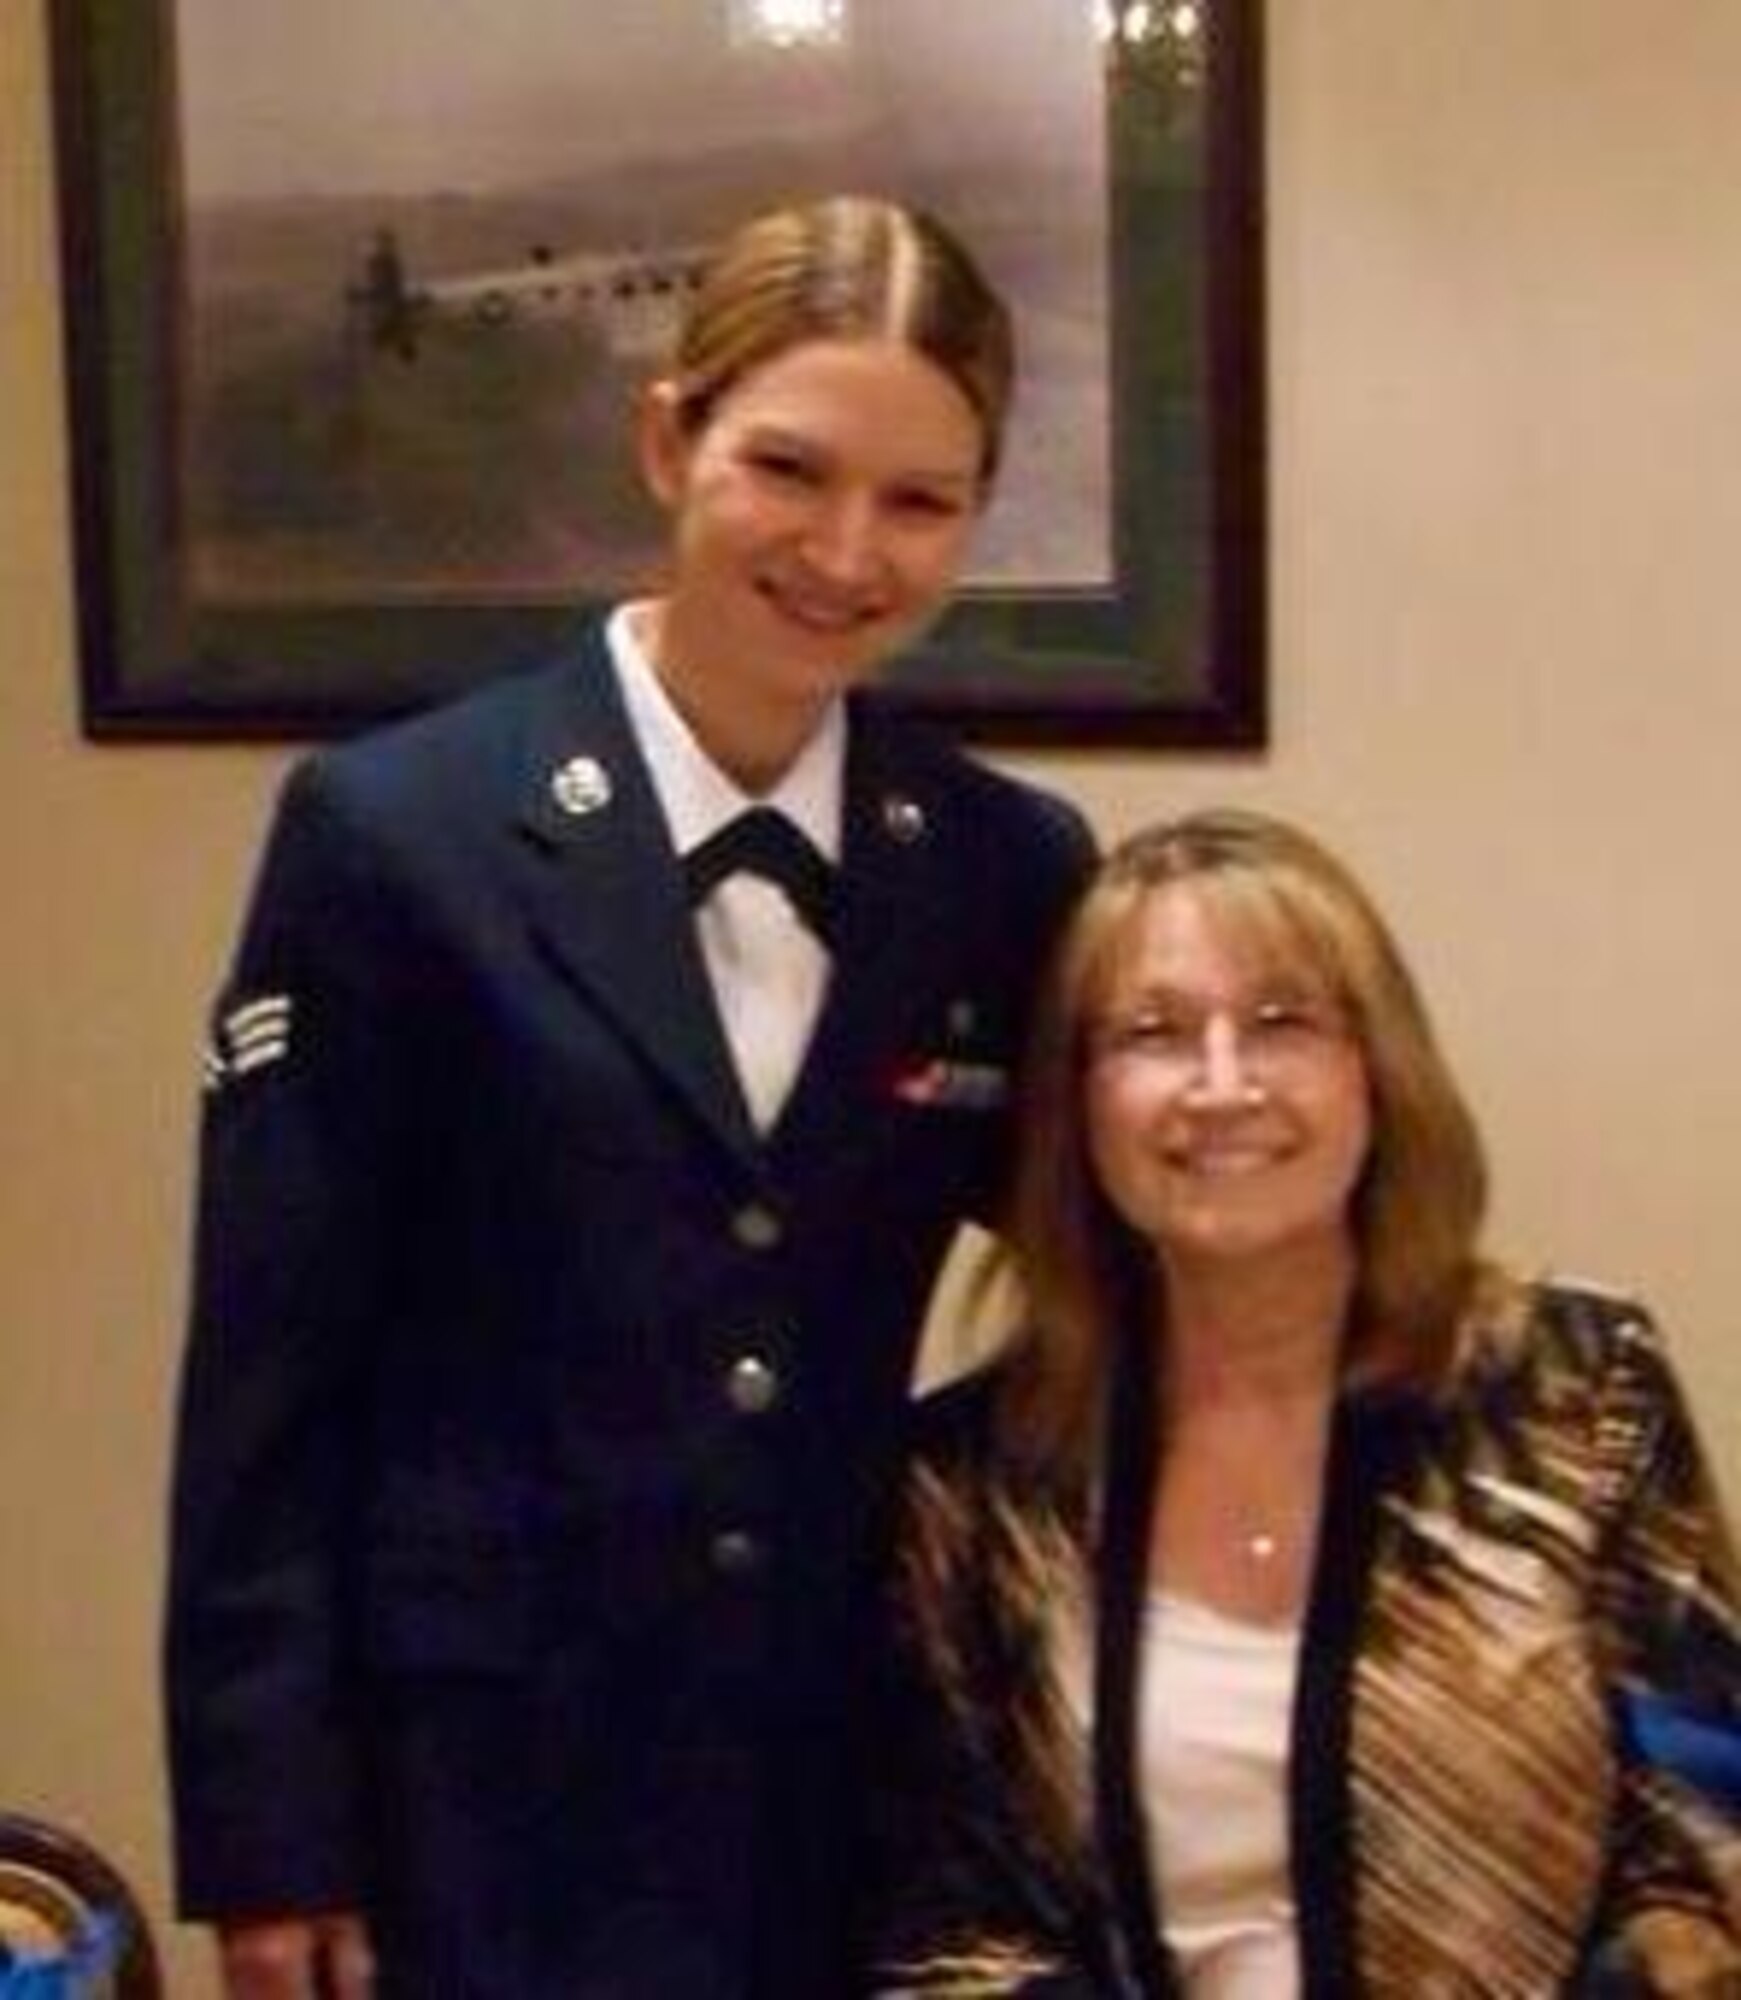 Courtesy photo of Air Force Reserve then Senior Amn. Nyssa Curtis, chaplain assistant, who poses next to her mother.